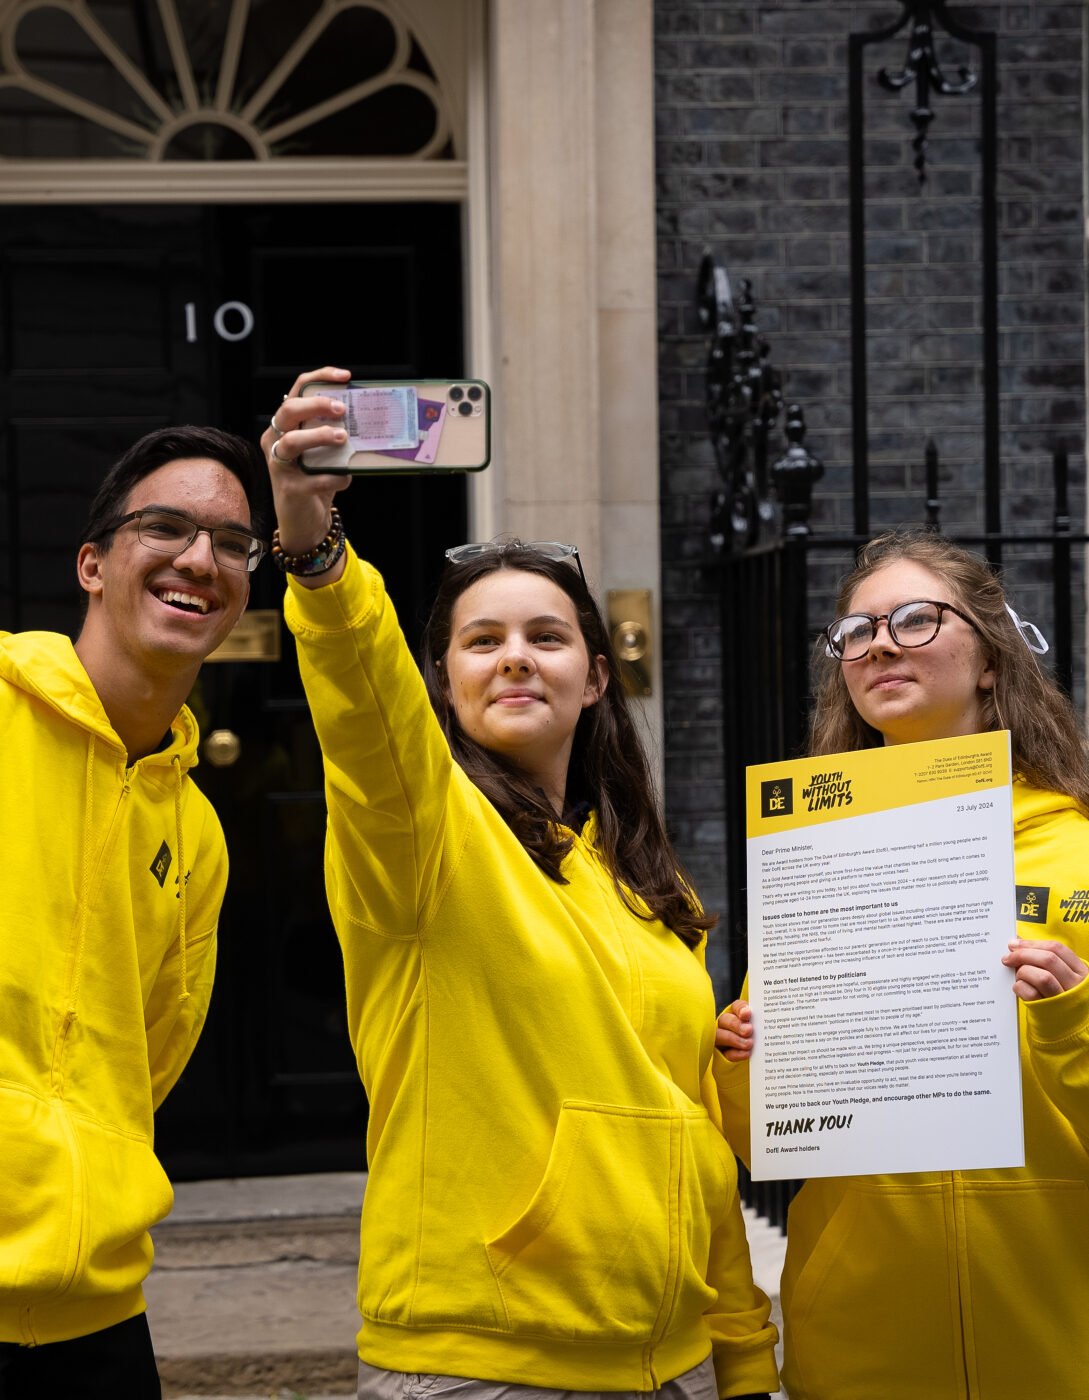 Three young people wearing yellow hoodies are standing in front of the iconic black door of 10 Downing Street. One of them is taking a selfie with a smartphone, while another is holding a document with the heading 